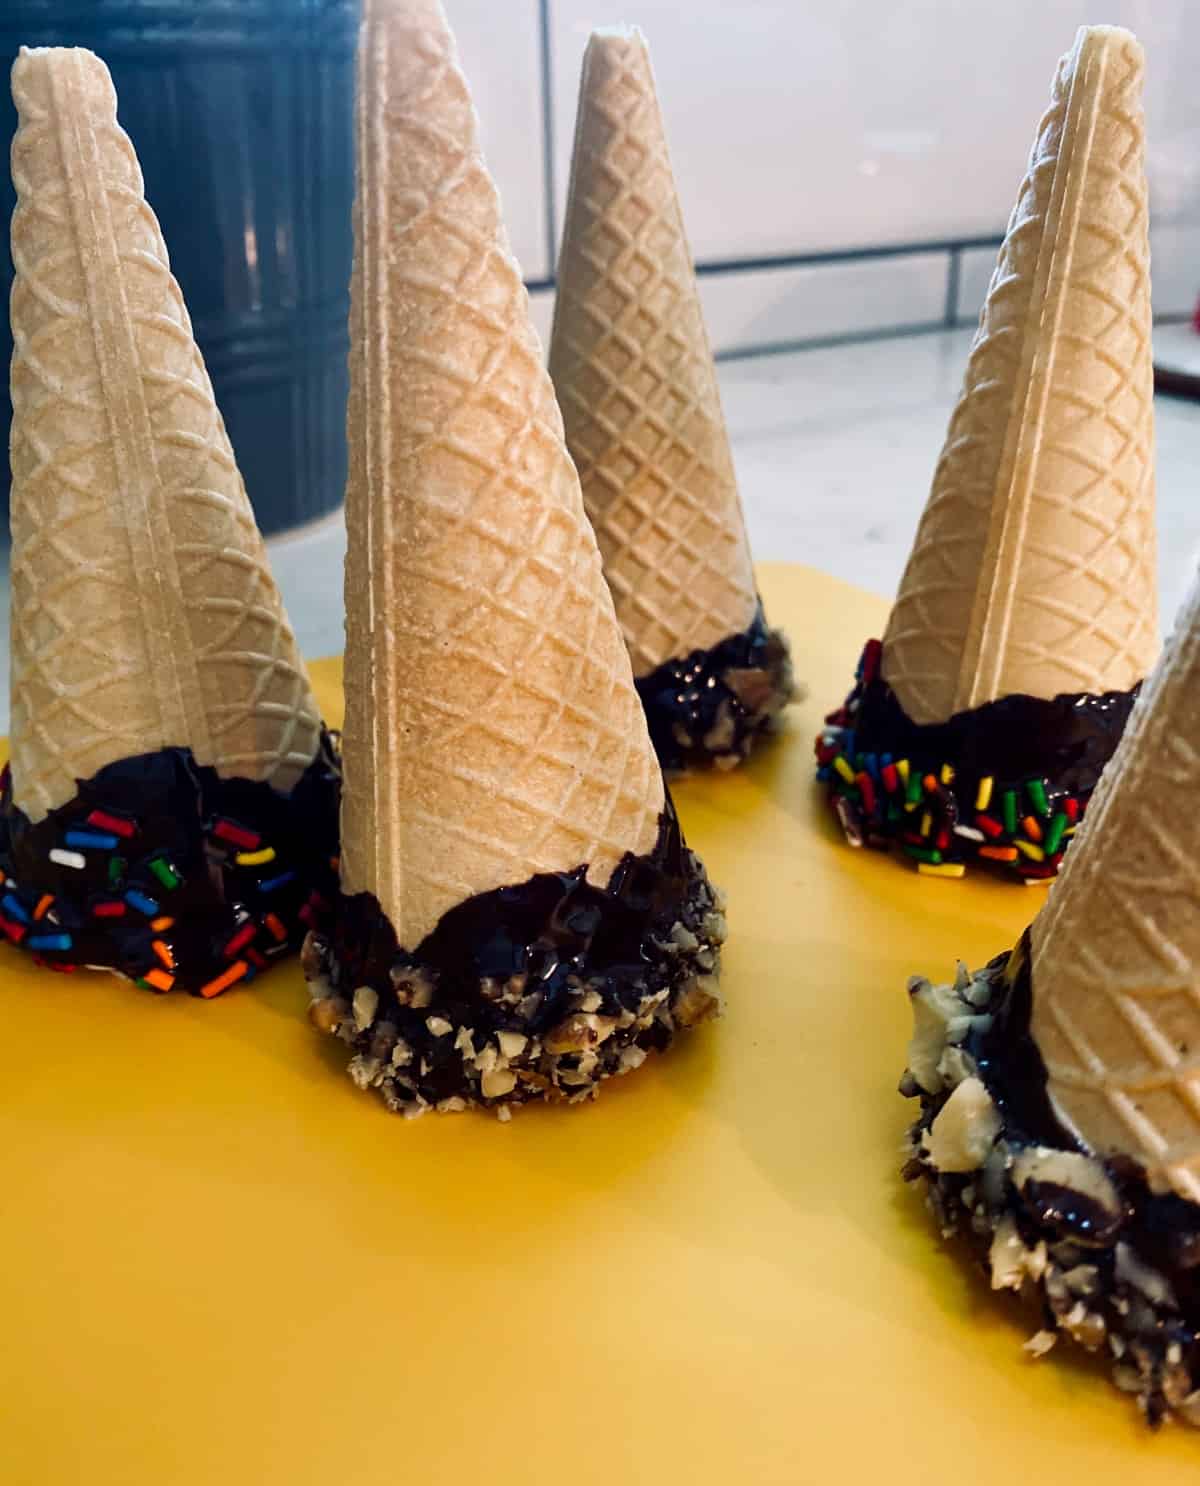 Chocolate dipped ice cream cones with sprinkles and chopped nuts sitting on yellow mat on counter.